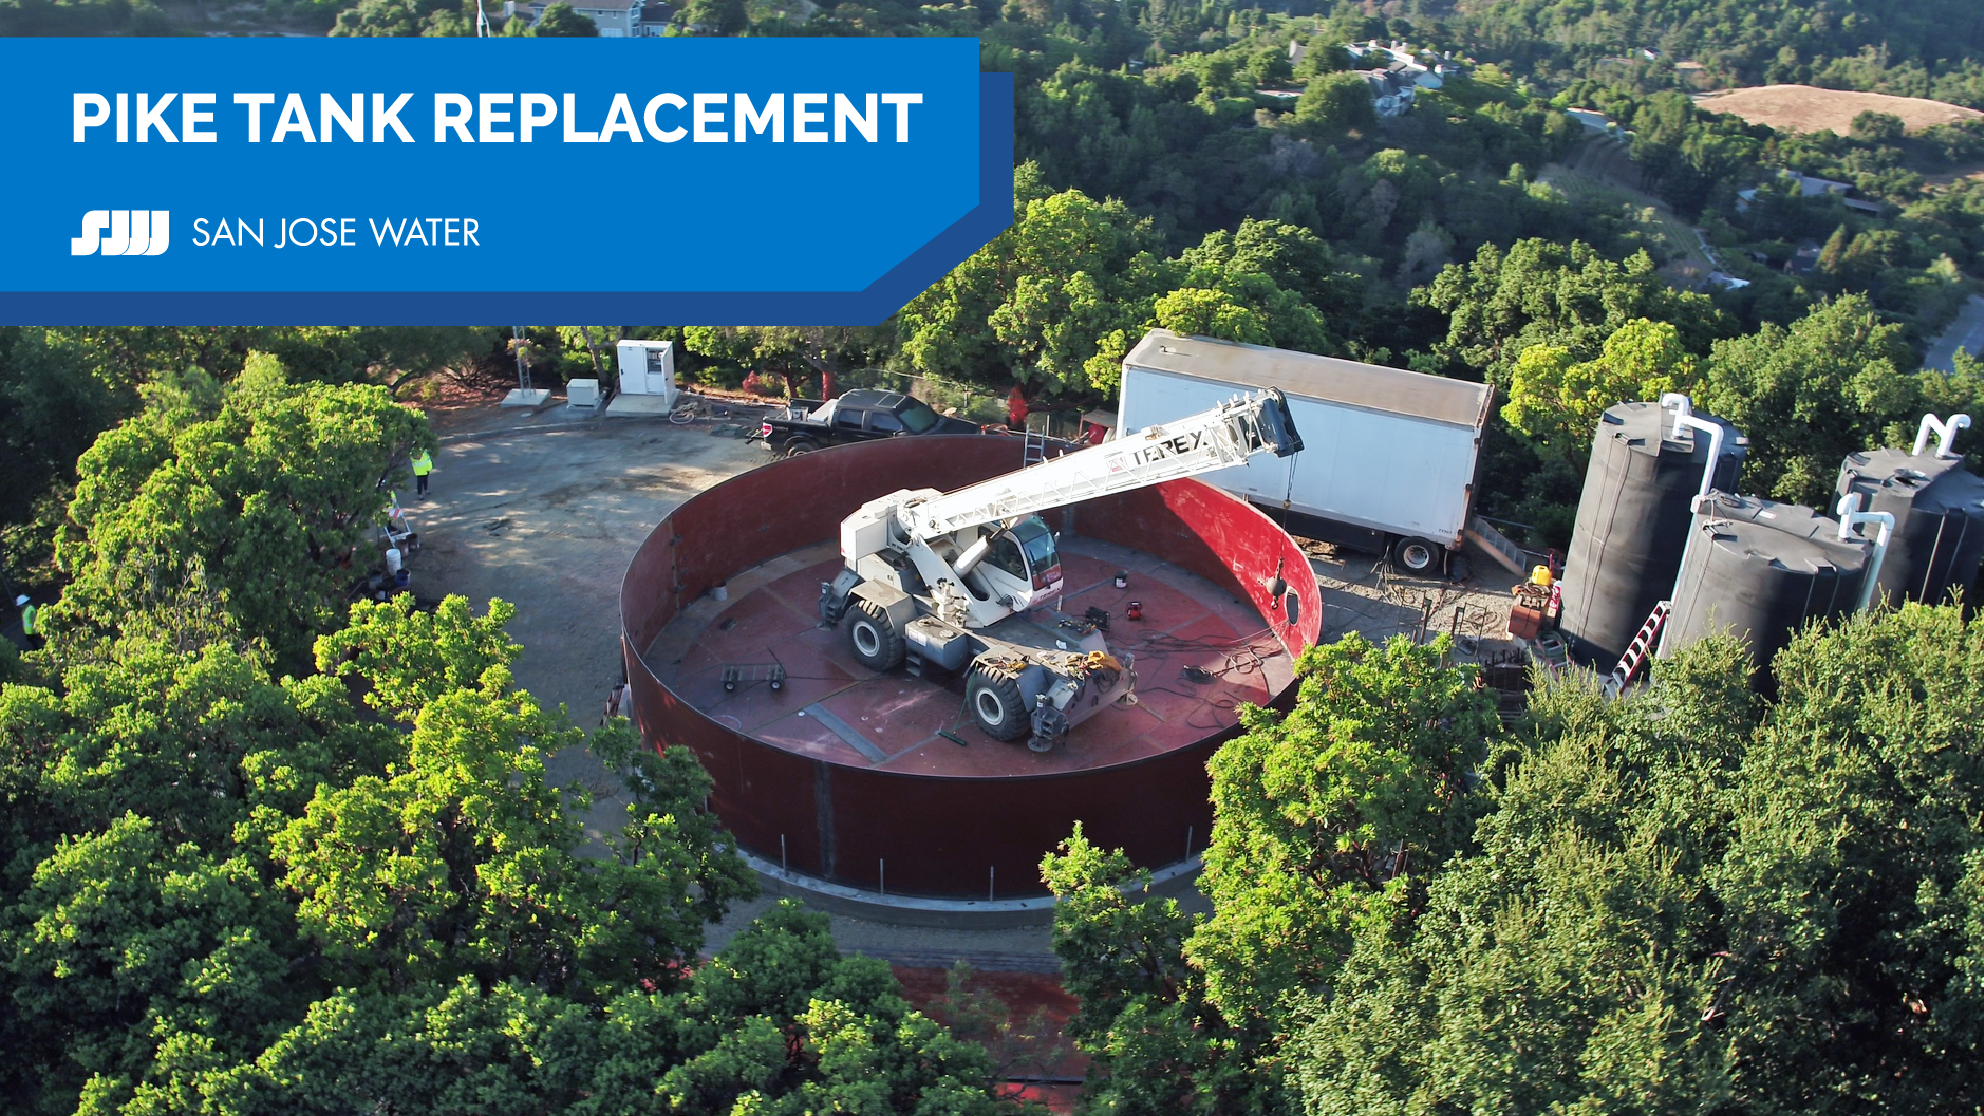 Aerial view of Pike tank replacement